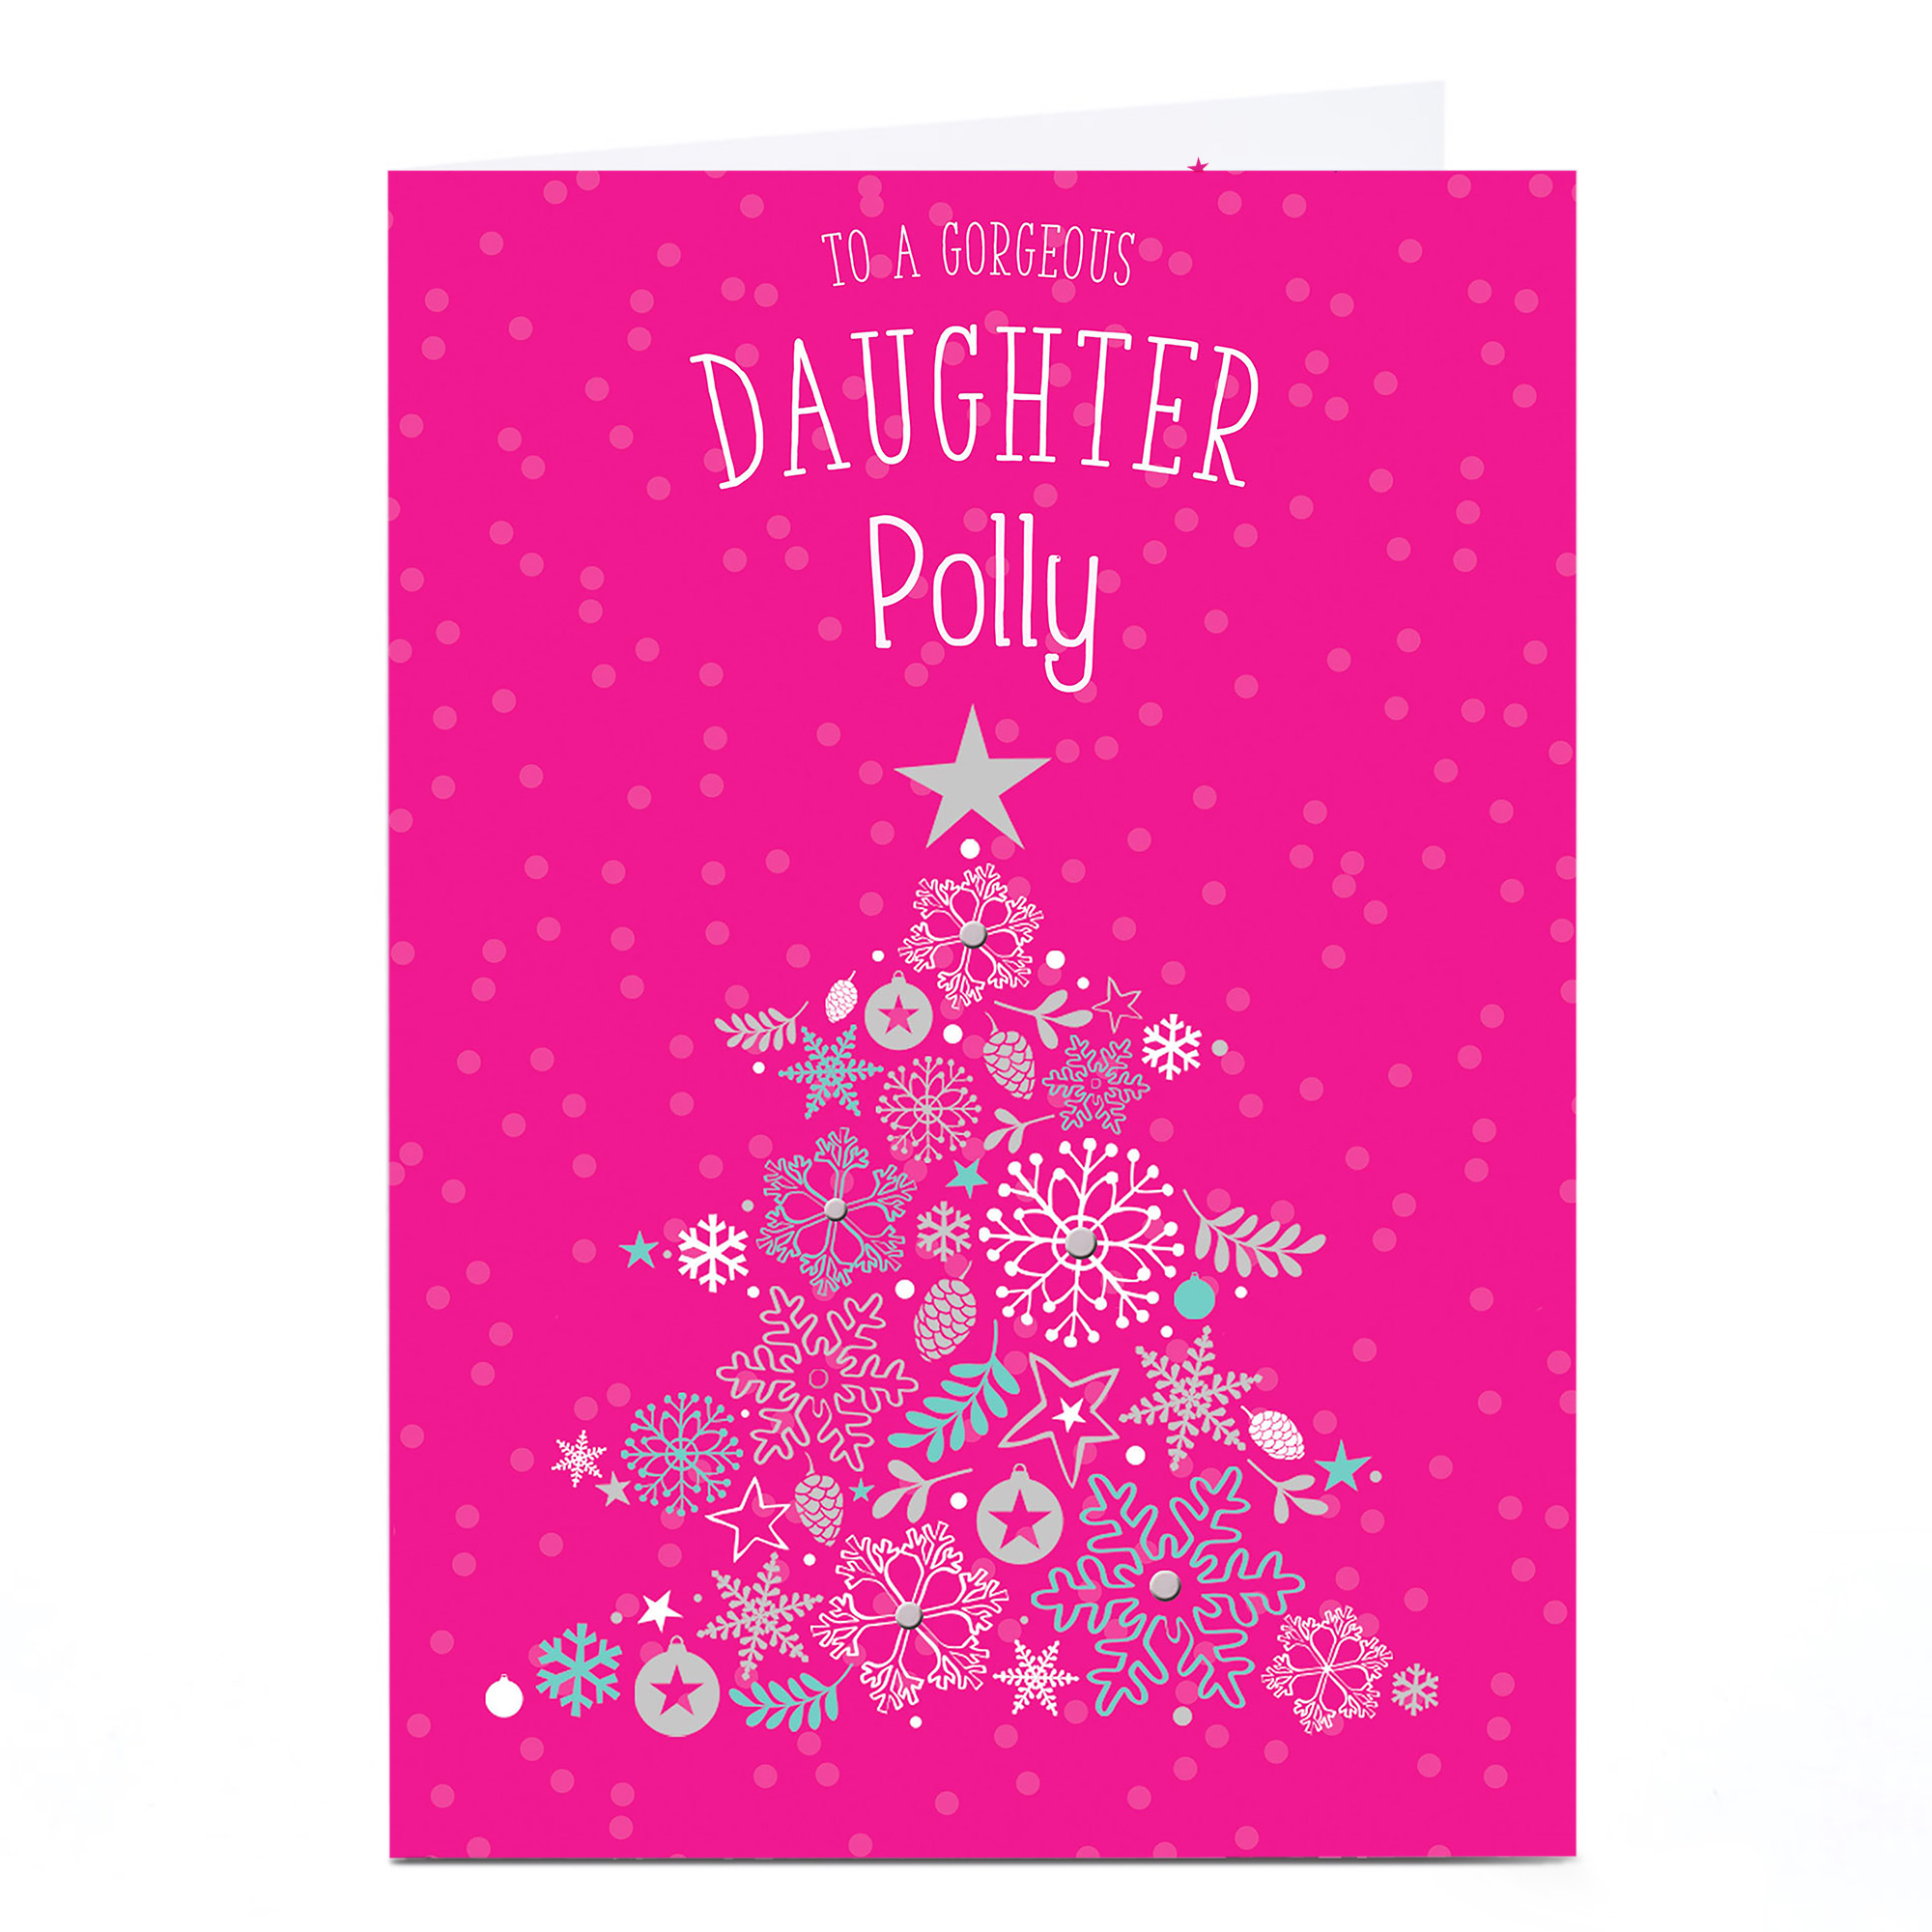 Personalised Christmas Card - Gorgeous Daughter